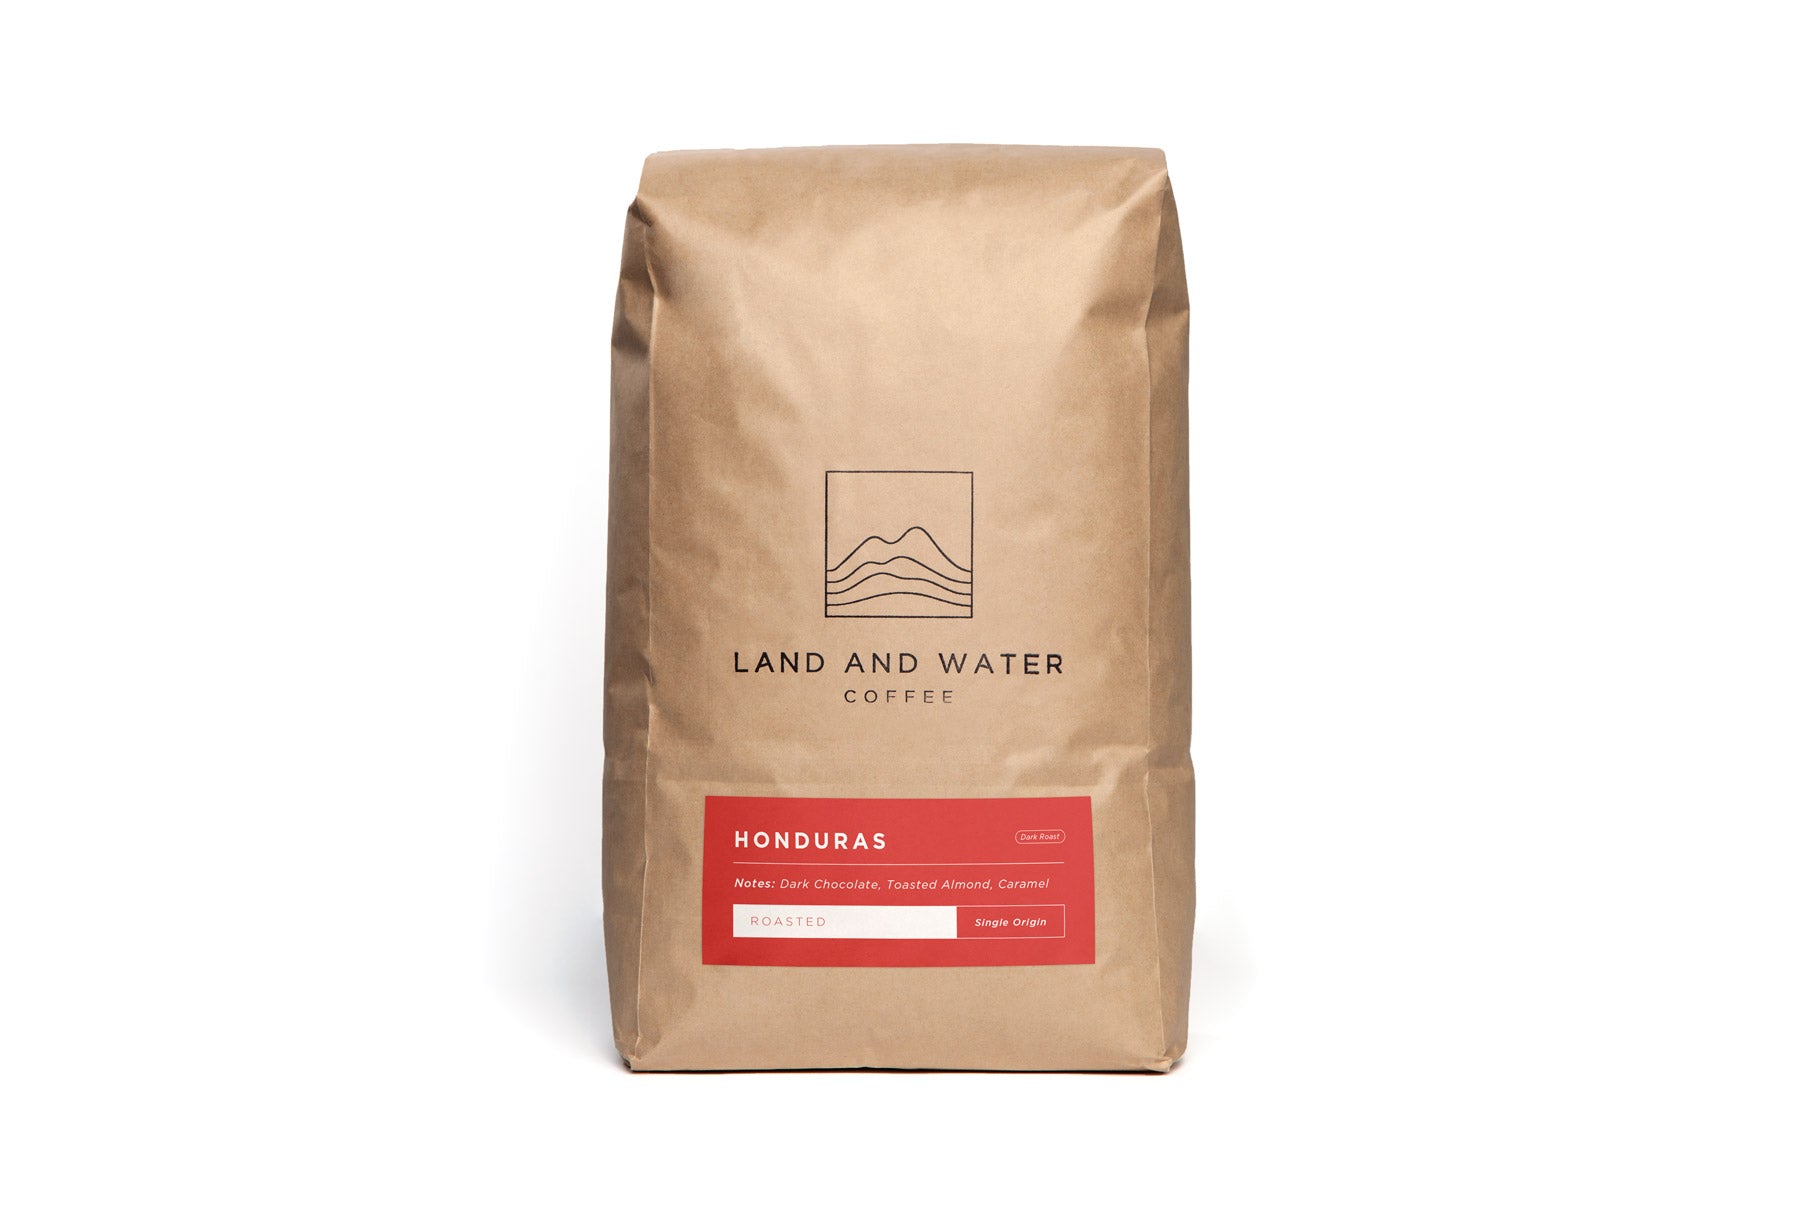 Land and Water Coffee Finca Terrerito, Copan Honduras, White Bag with red label on a red background